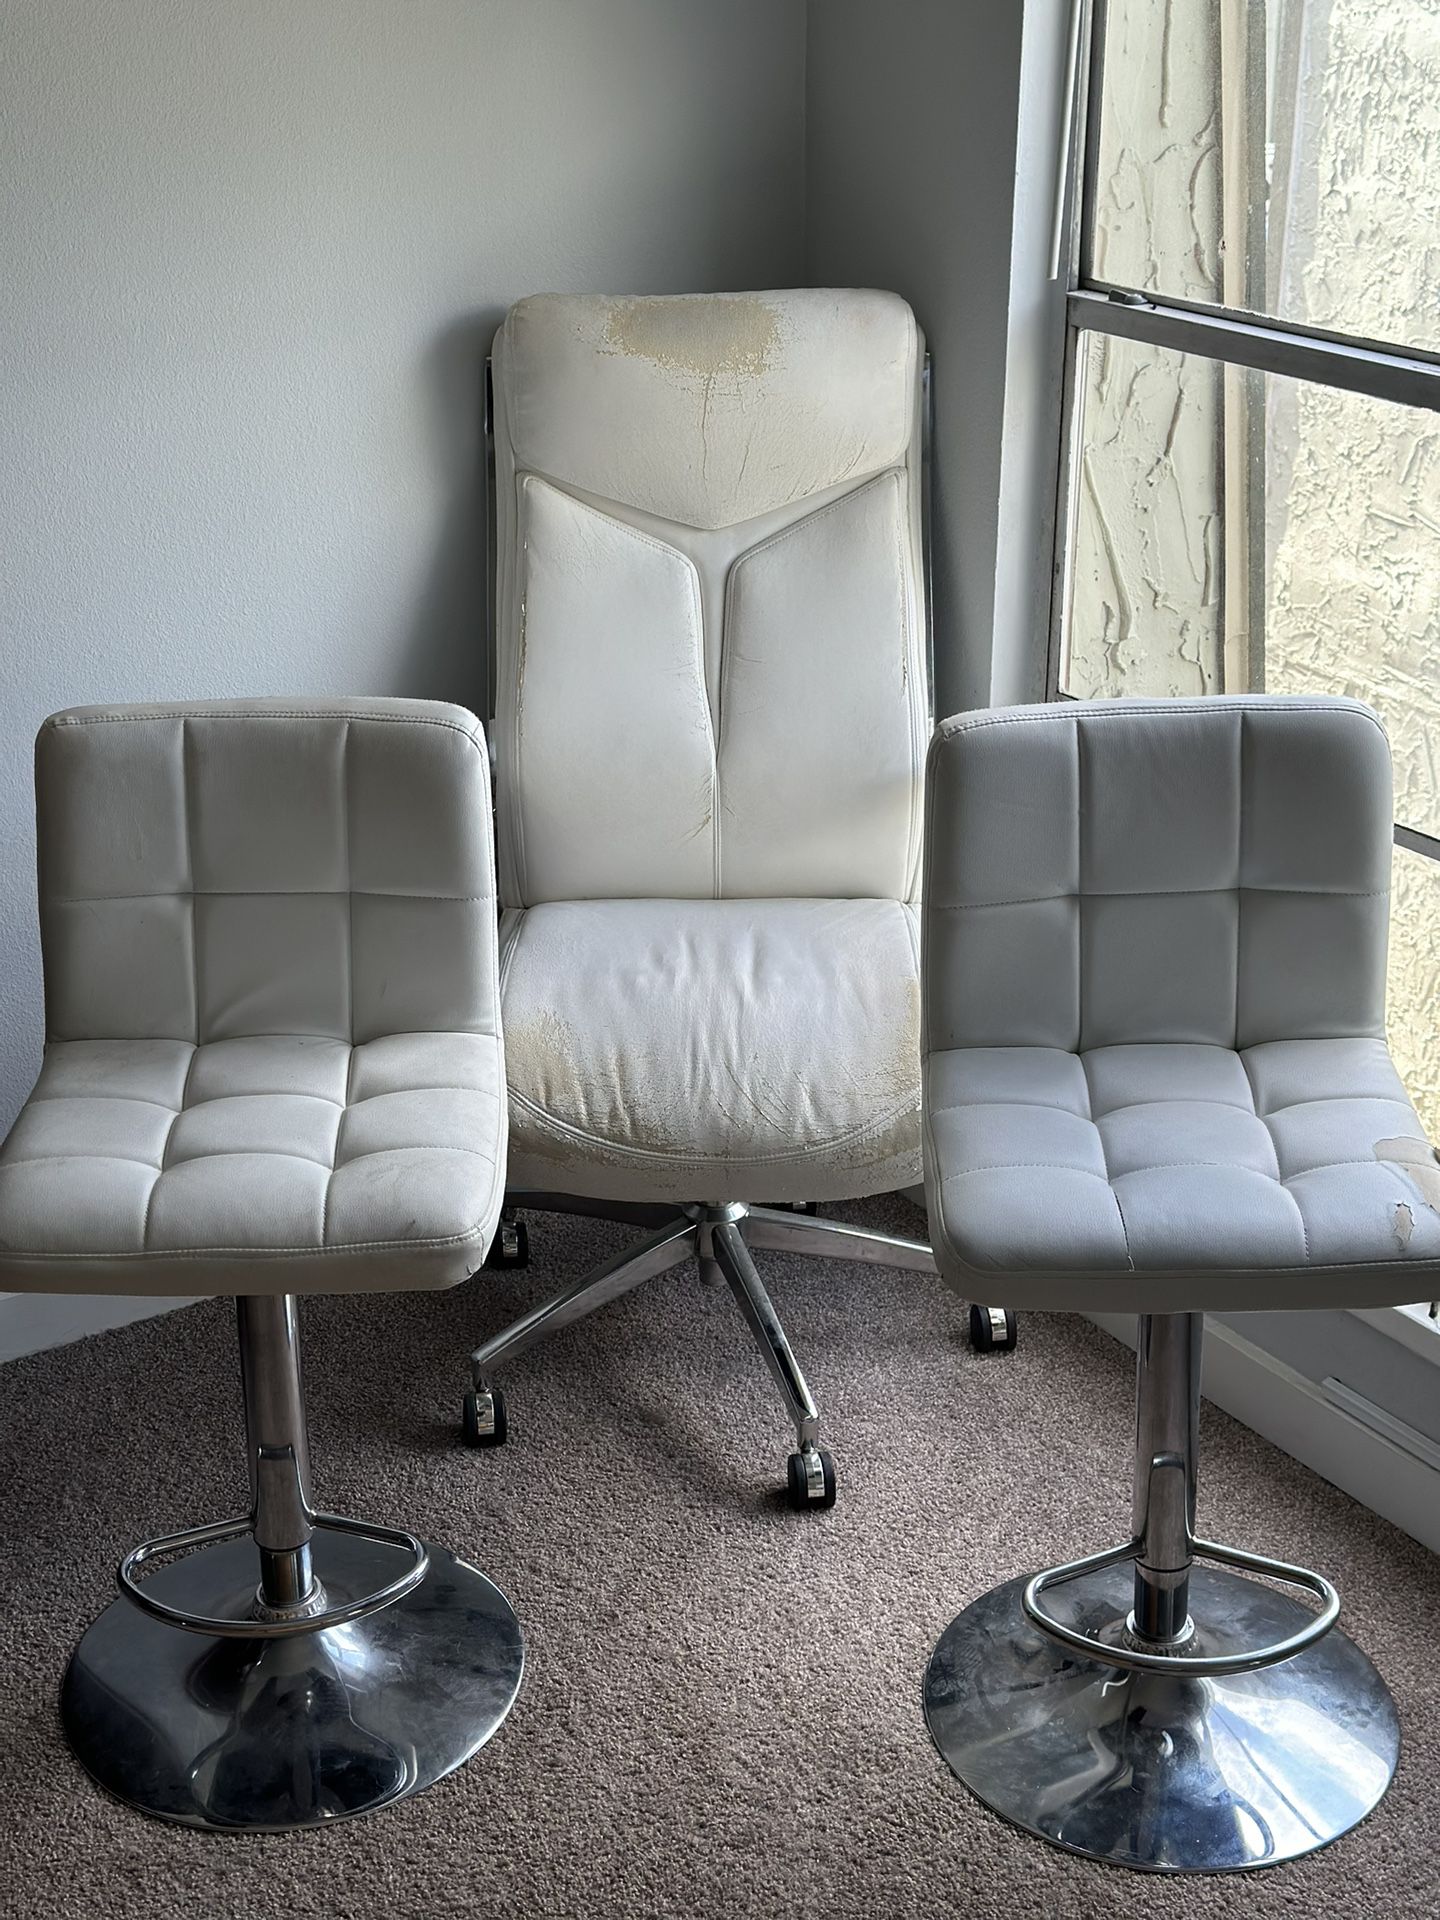 LUXURY COMPUTER CHAIR AND BAR STOOLS